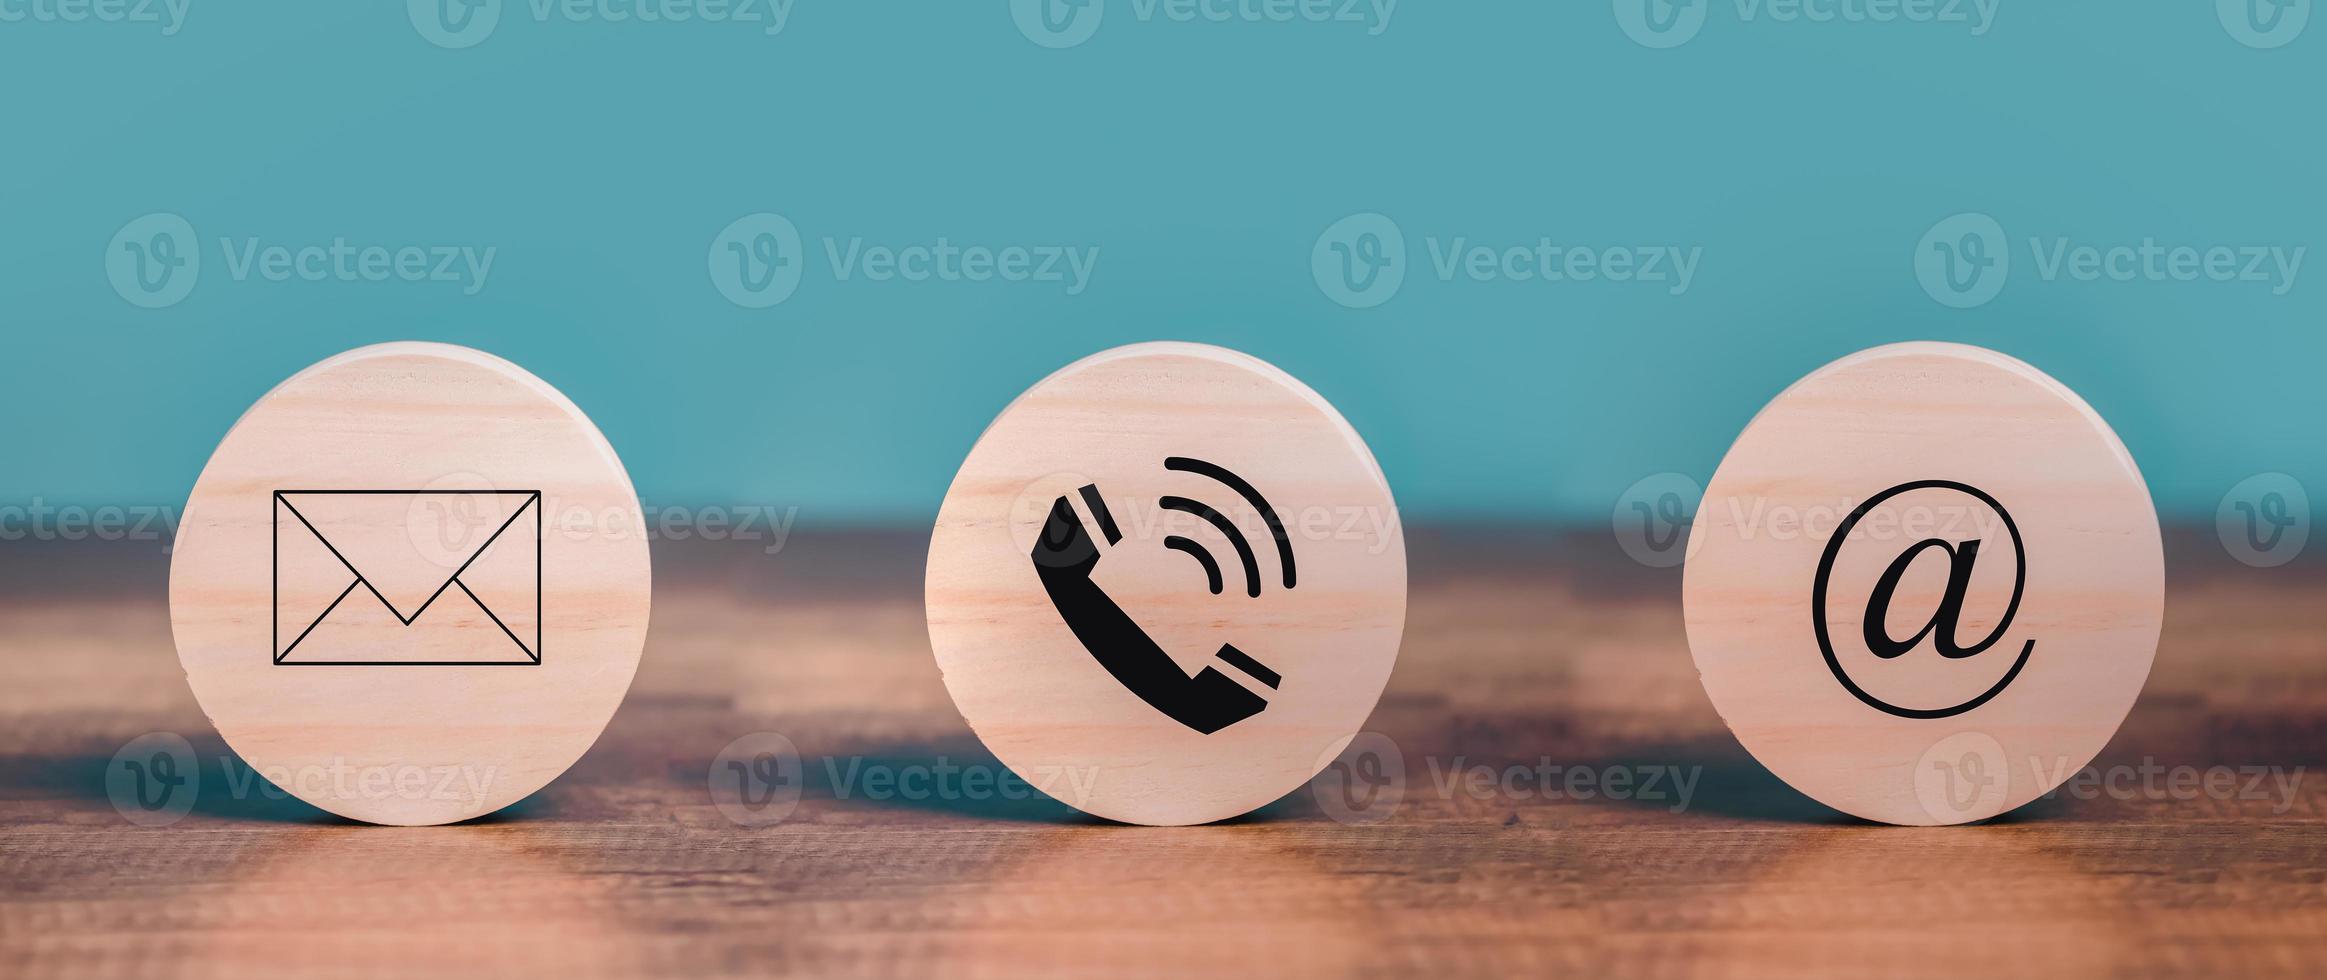 Customer Contact Us Service with Mail, Email, Telephone icons on the circle wooden  put on the desk. photo